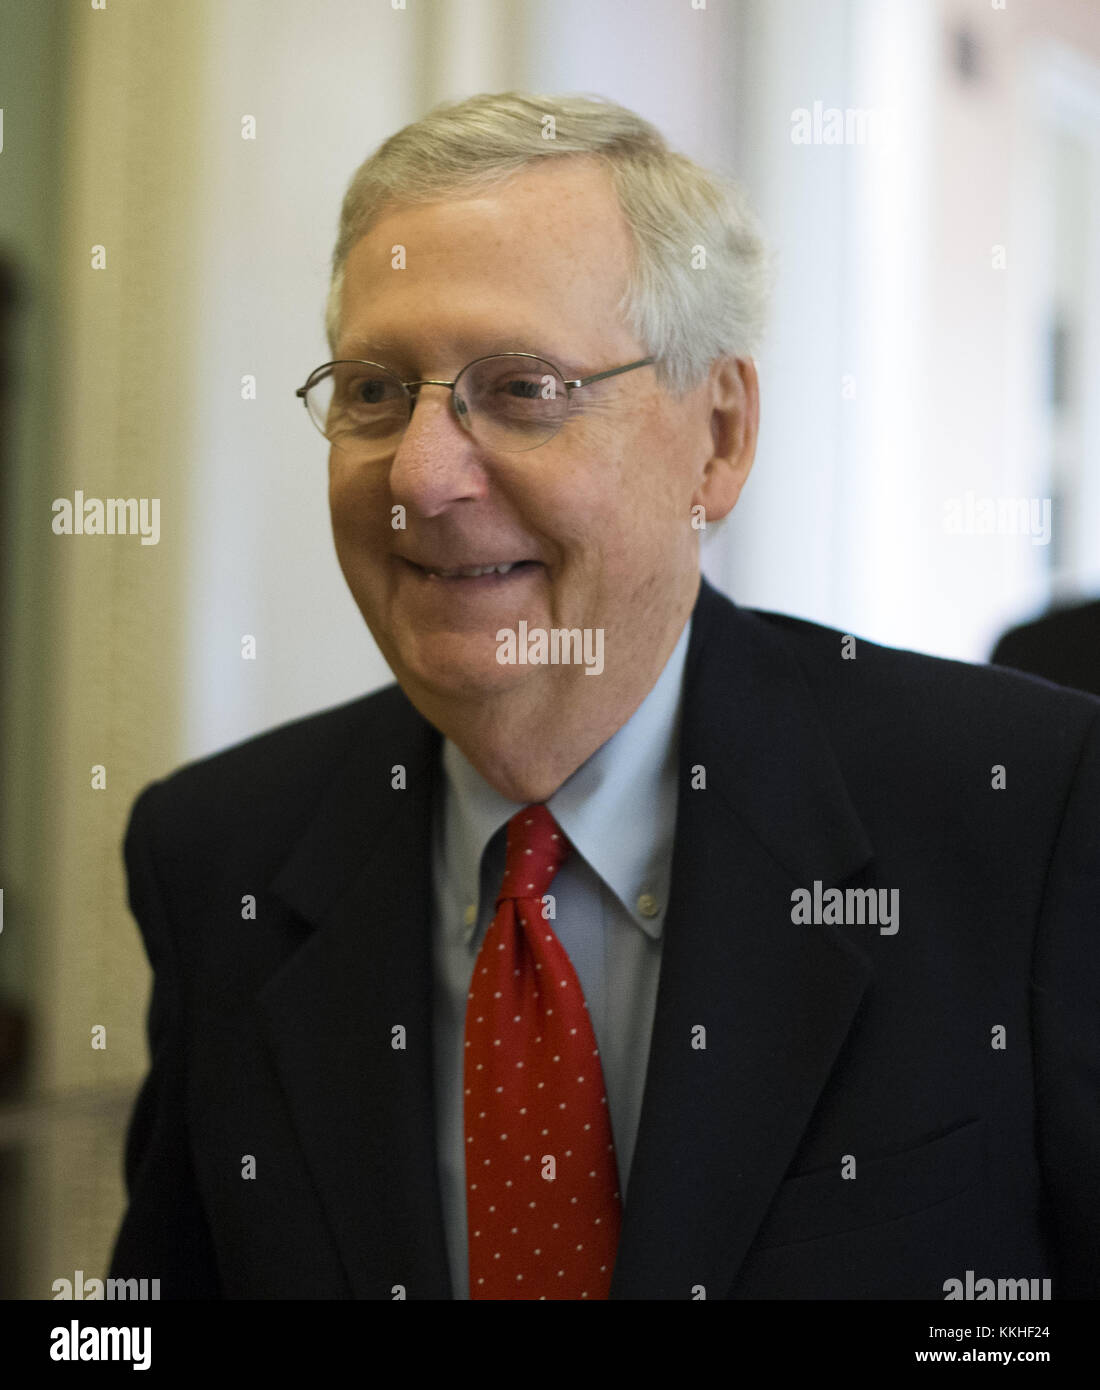 Washington, District of Columbia, USA. 1st Dec, 2017. United States Senate Majority Leader Mitch McConnell (Republican of Kentucky) walks from his office to the Senate chamber for a procedural vote to move forward with voting on the Republican proposed tax reform bill at the United States Capitol in Washington, DC on Friday, December 1, 2017.Credit: Alex Edelman/CNP Credit: Alex Edelman/CNP/ZUMA Wire/Alamy Live News Stock Photo